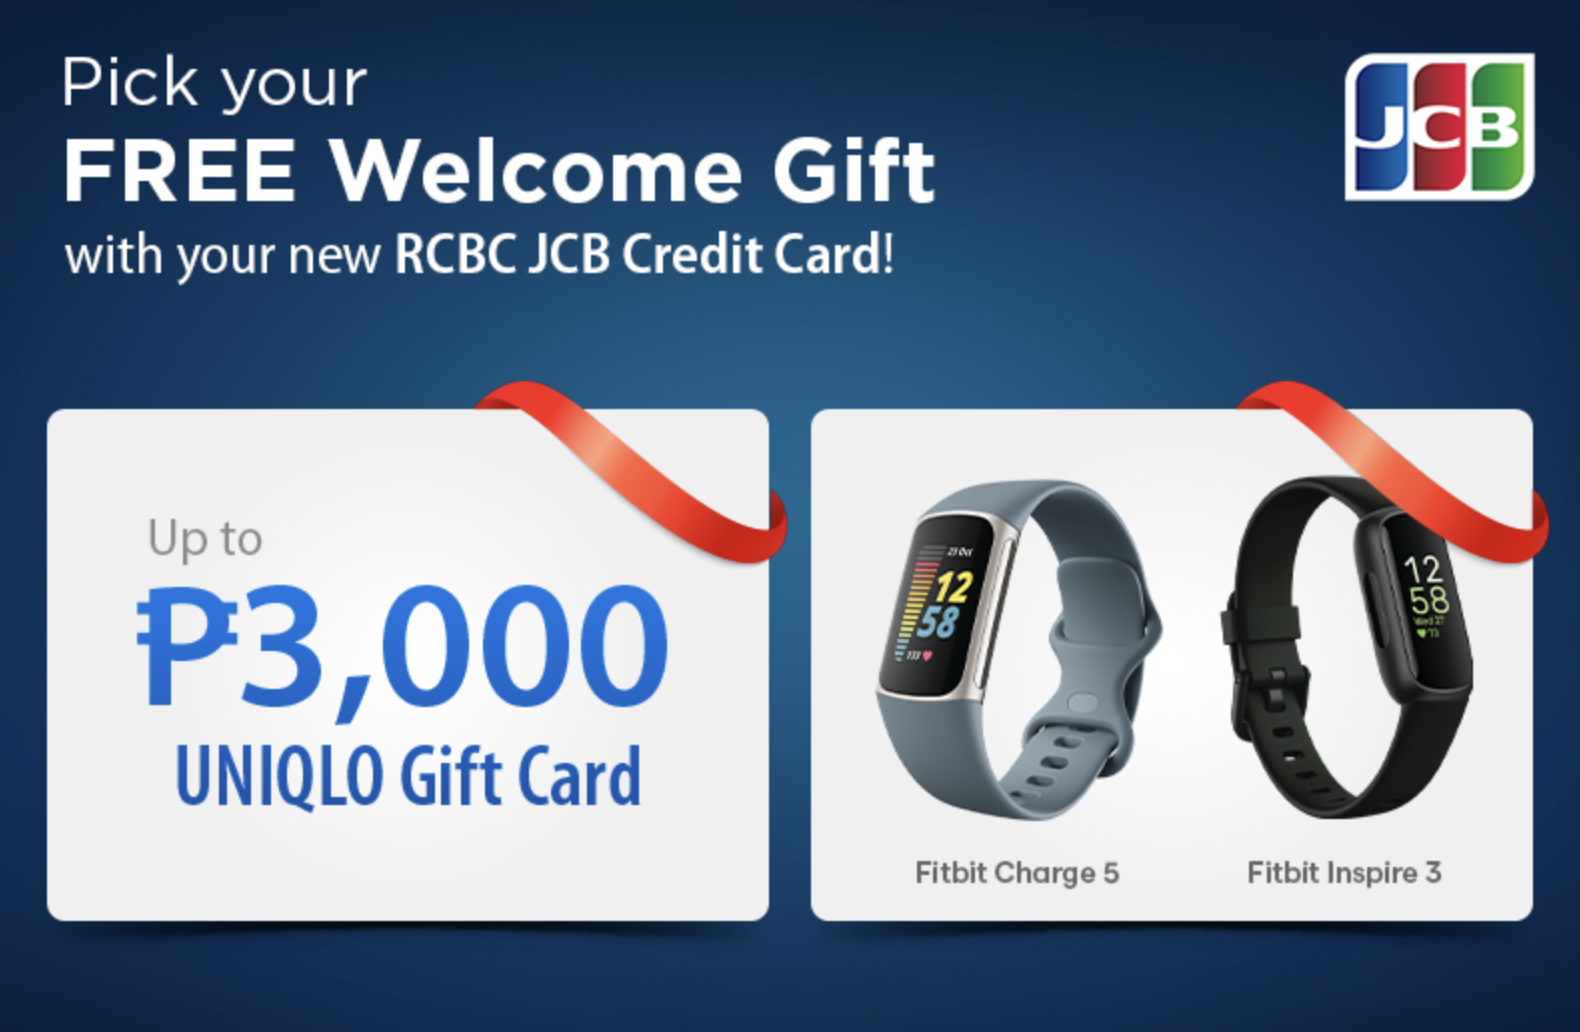 rcbc credit card promos - Up to ₱3,000 Uniqlo Gift Card or Fitbit Inspire 3 or Fitbit Inspire Charge 5